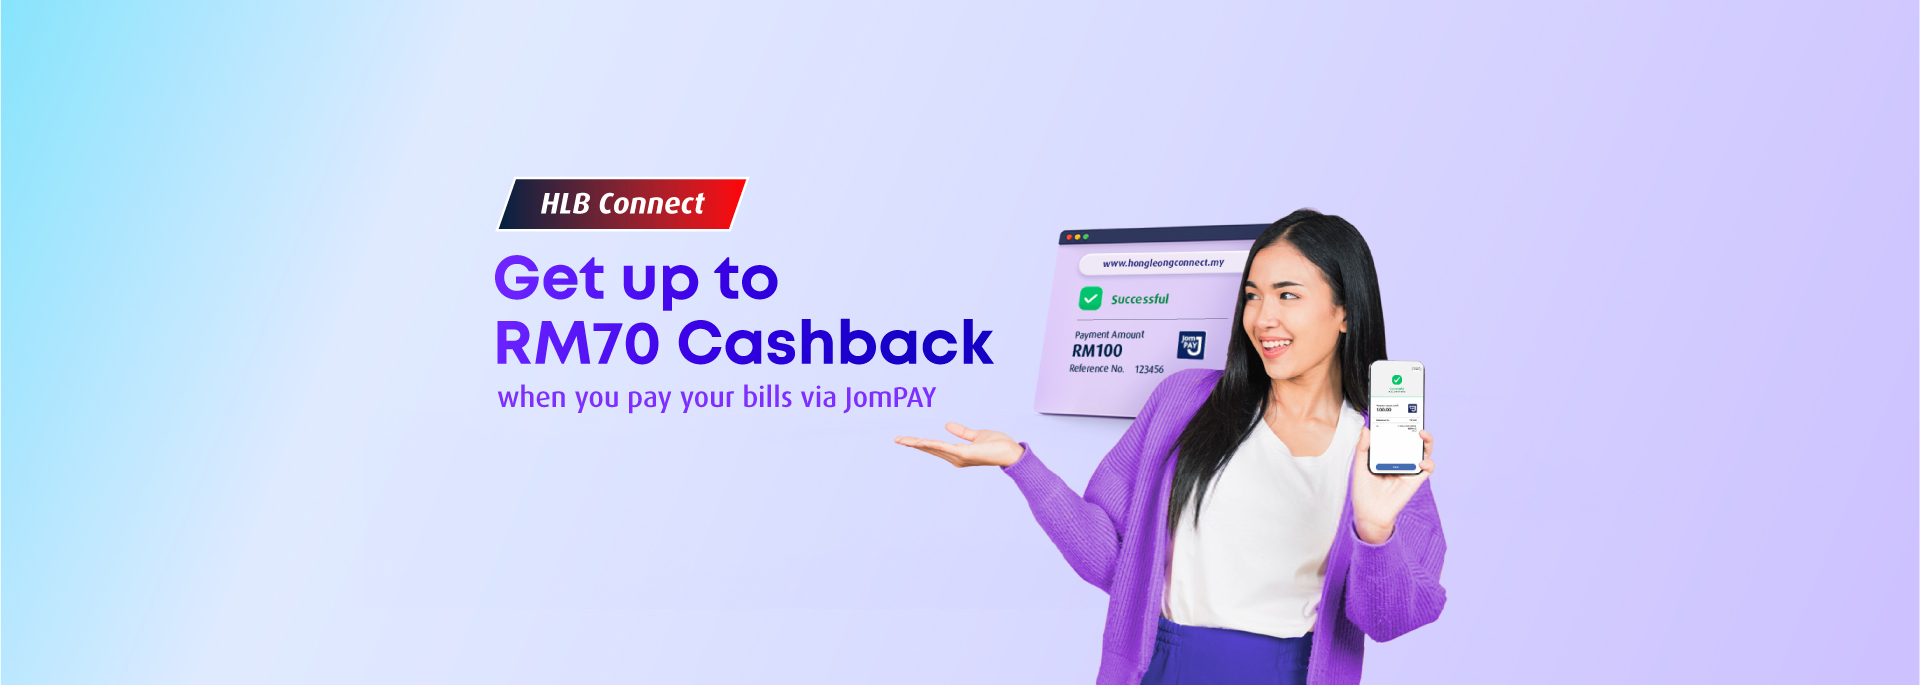 Up to RM70 Cashback to be won when you pay bills via JomPAY on HLB Connect